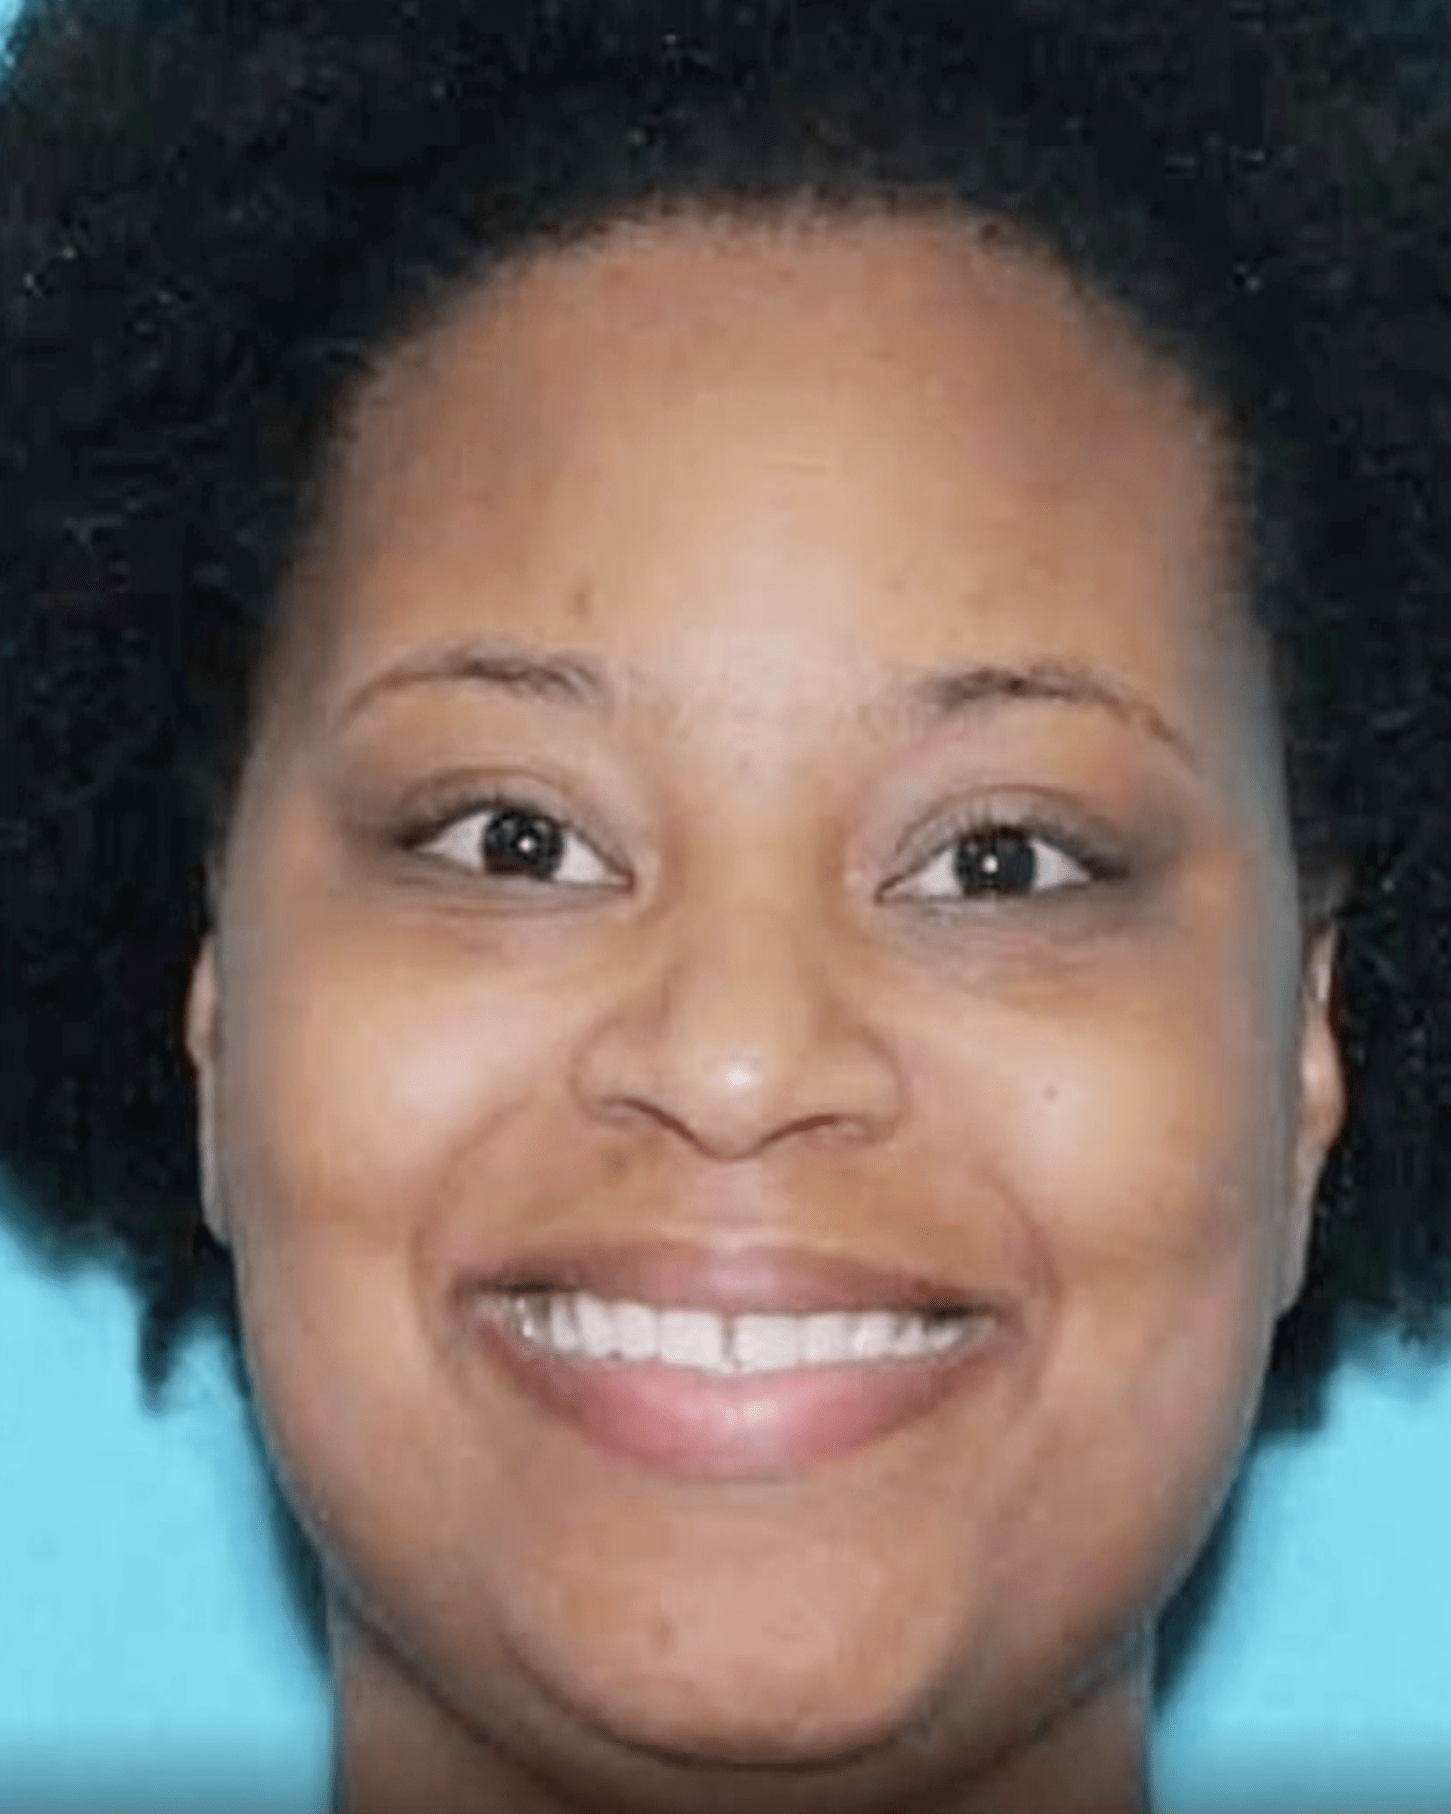 A Texas woman missing for more than a week has been found dead